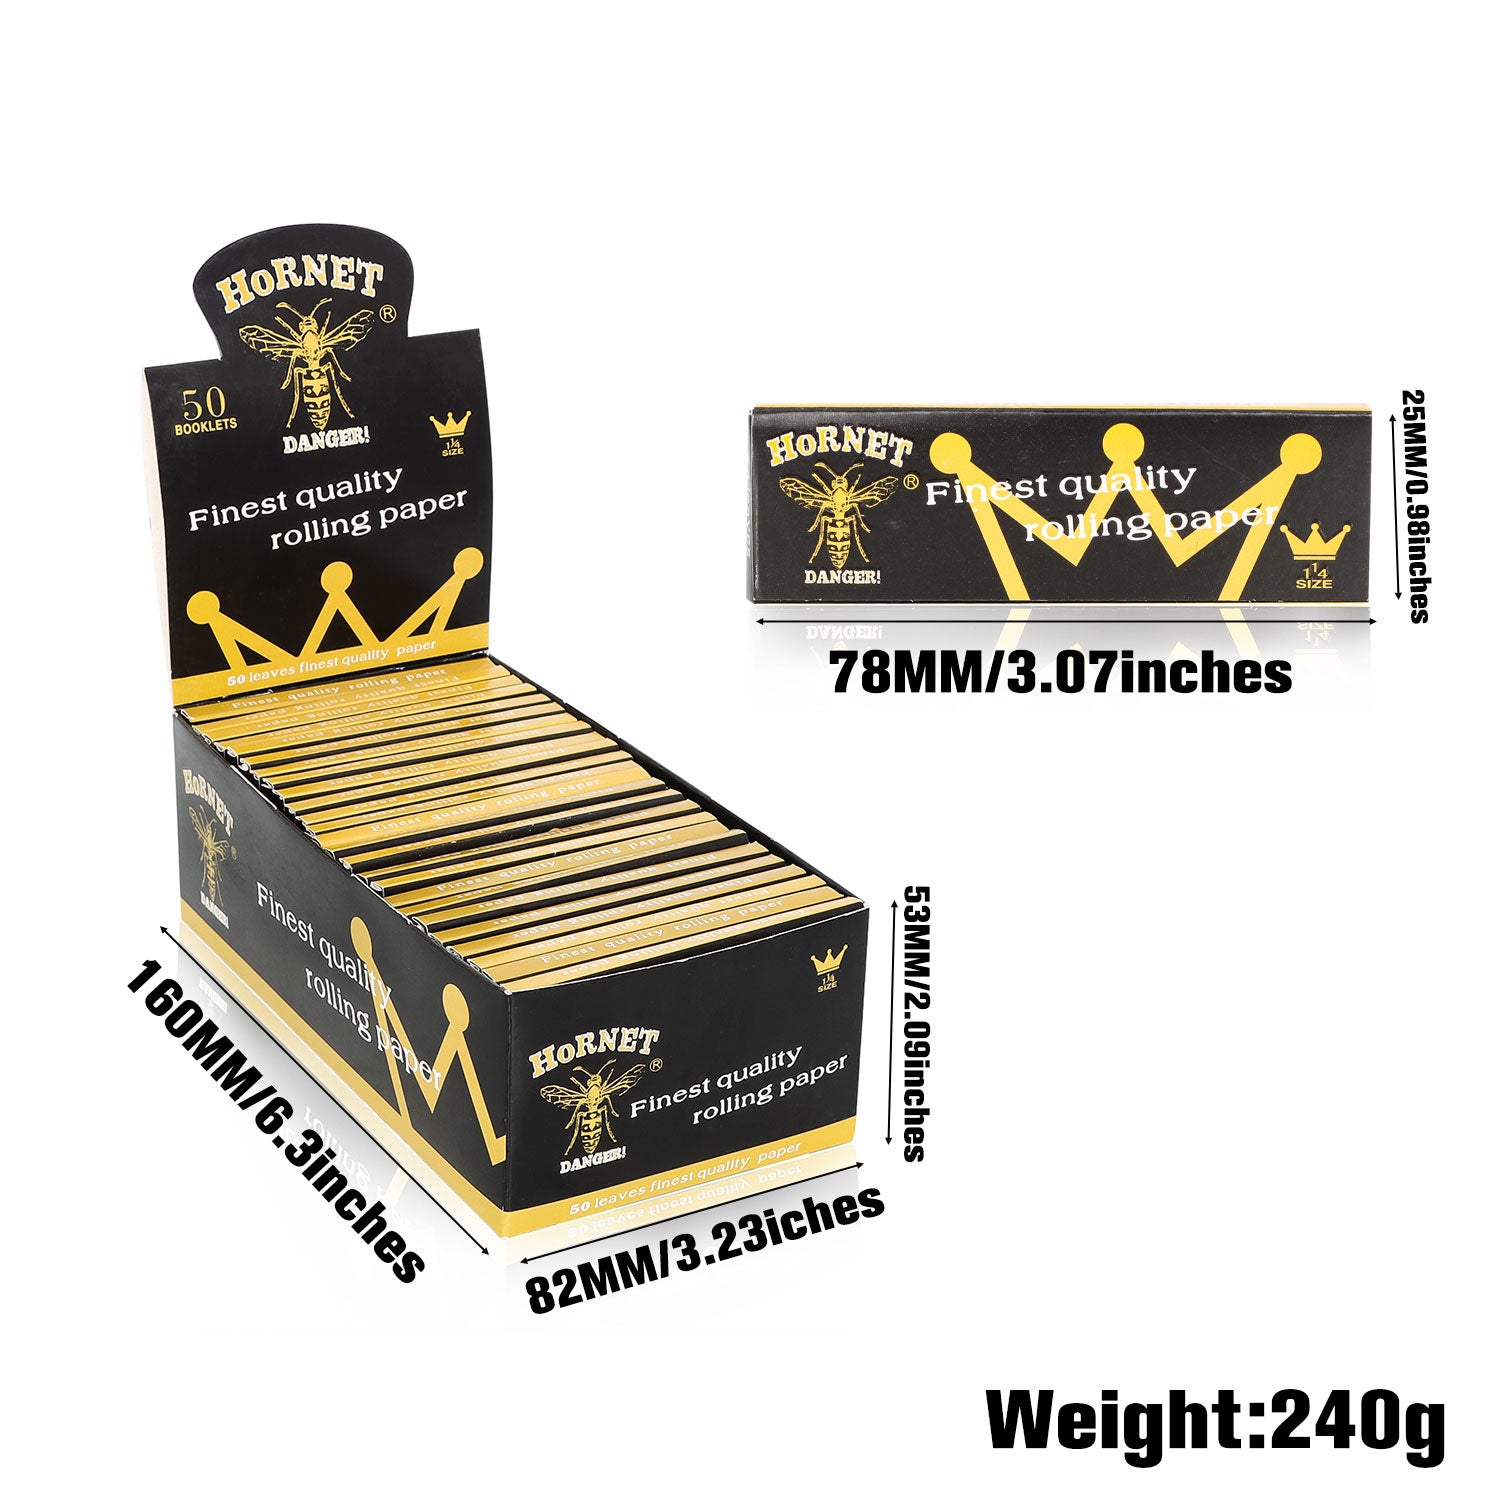 HORNET 1 1/4 Size Rolling Papers, Natural Slim Rolling Papers, White Organic Rolling Paper, 50 Leaves / Pack 50 Pack / Box